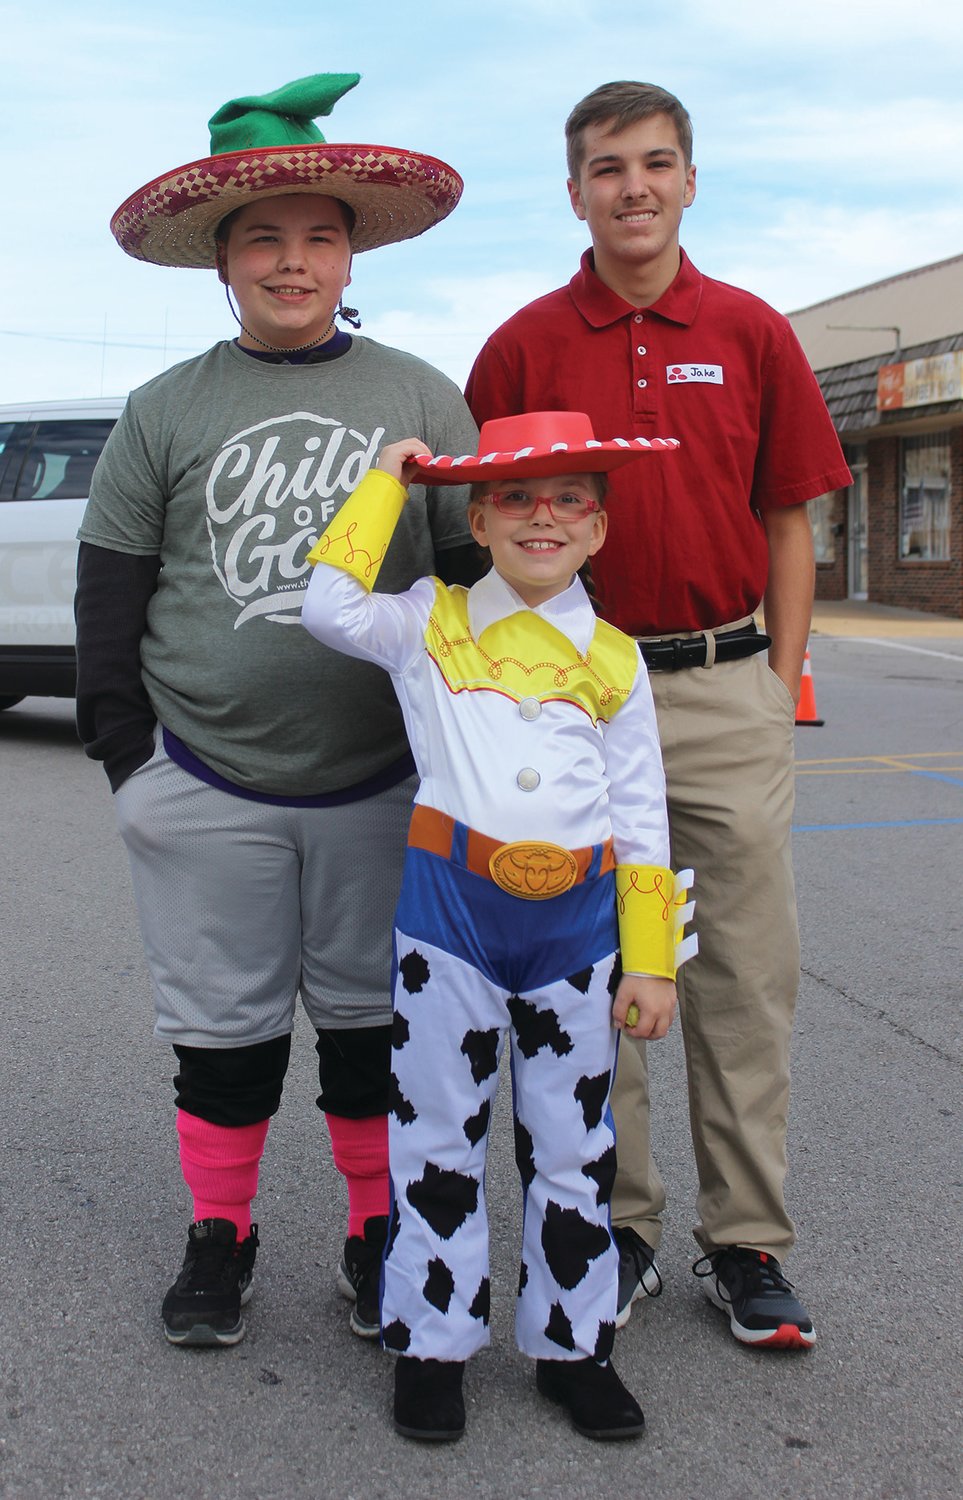 Shown, from left: Josiah Schott (Unique Child of God), Lydia Schott (Jessie from Toy Story) and Isaiah Schott ("Jake" from State Farm) during the Trunk or Treat in Mountain Grove.